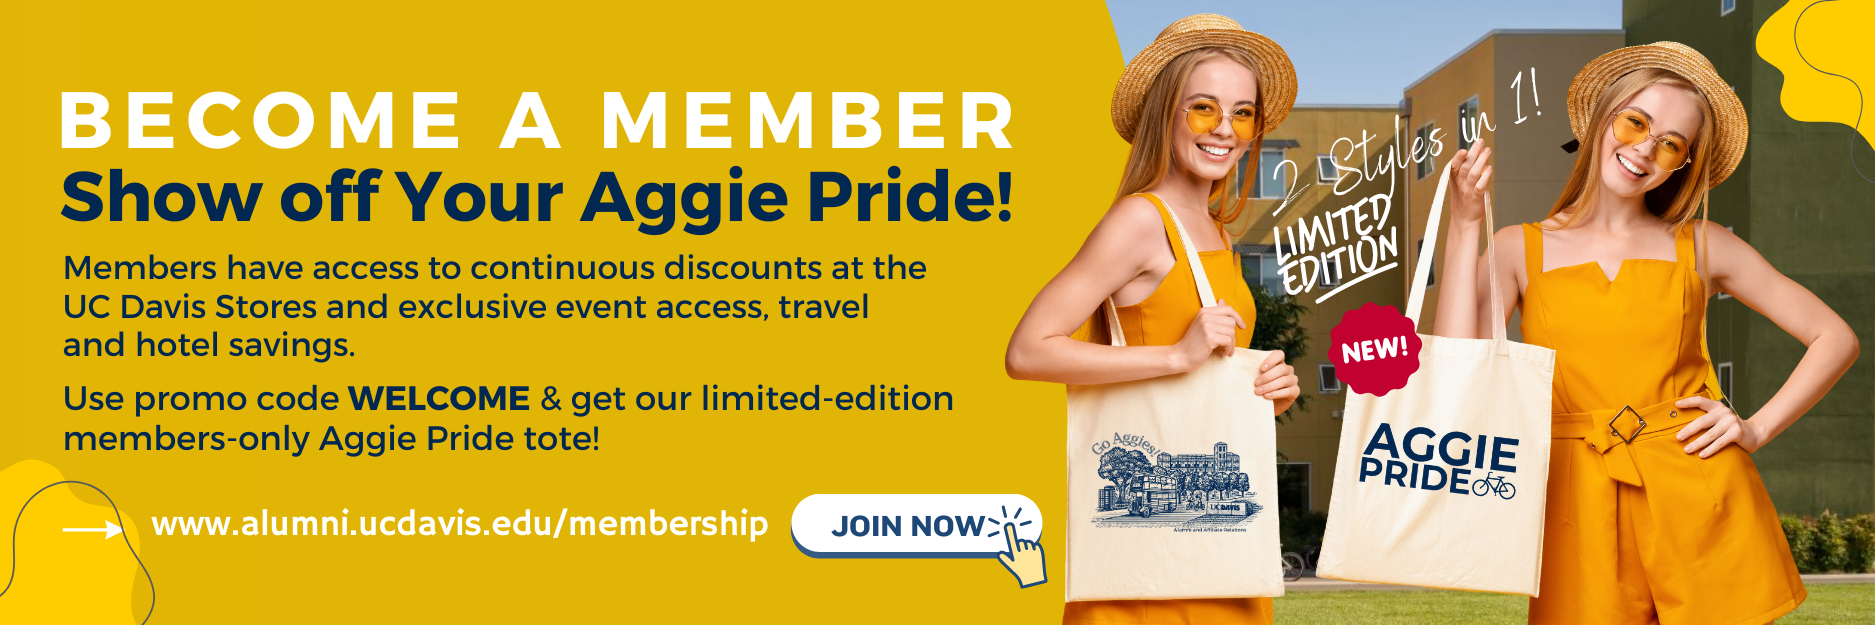 Members have access to continuous discounts at the UC Davis Stores and exclusive event access, travel and hotel savings. Use promo code WELCOME & get our limited-edition members-only Aggie Pride tote!